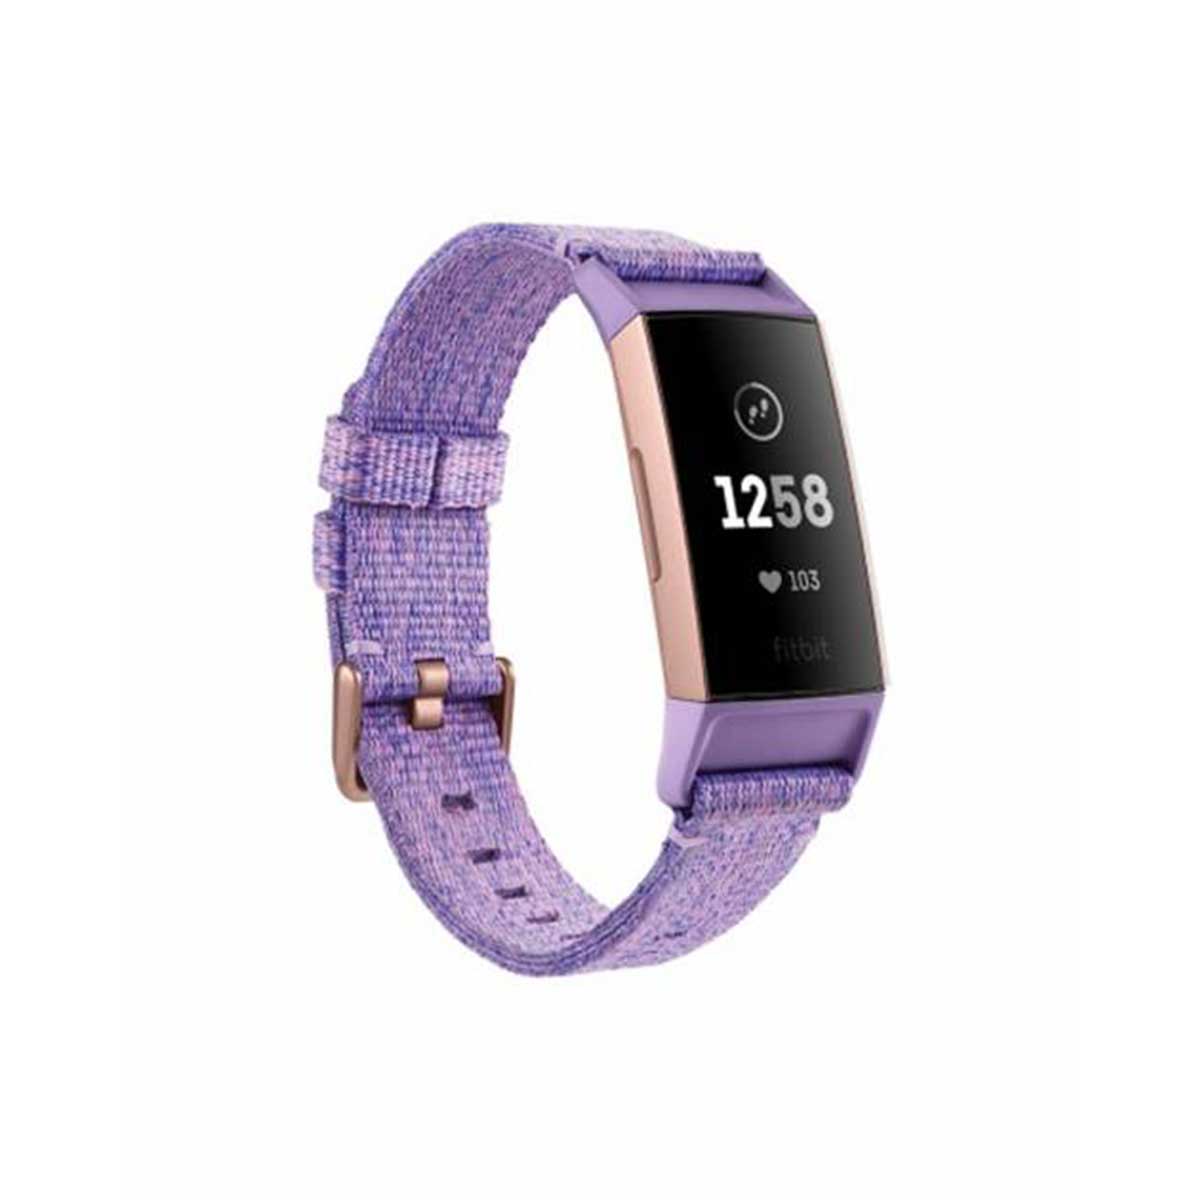 Fitbit - Charge 3 Special Edition - Lavender Woven